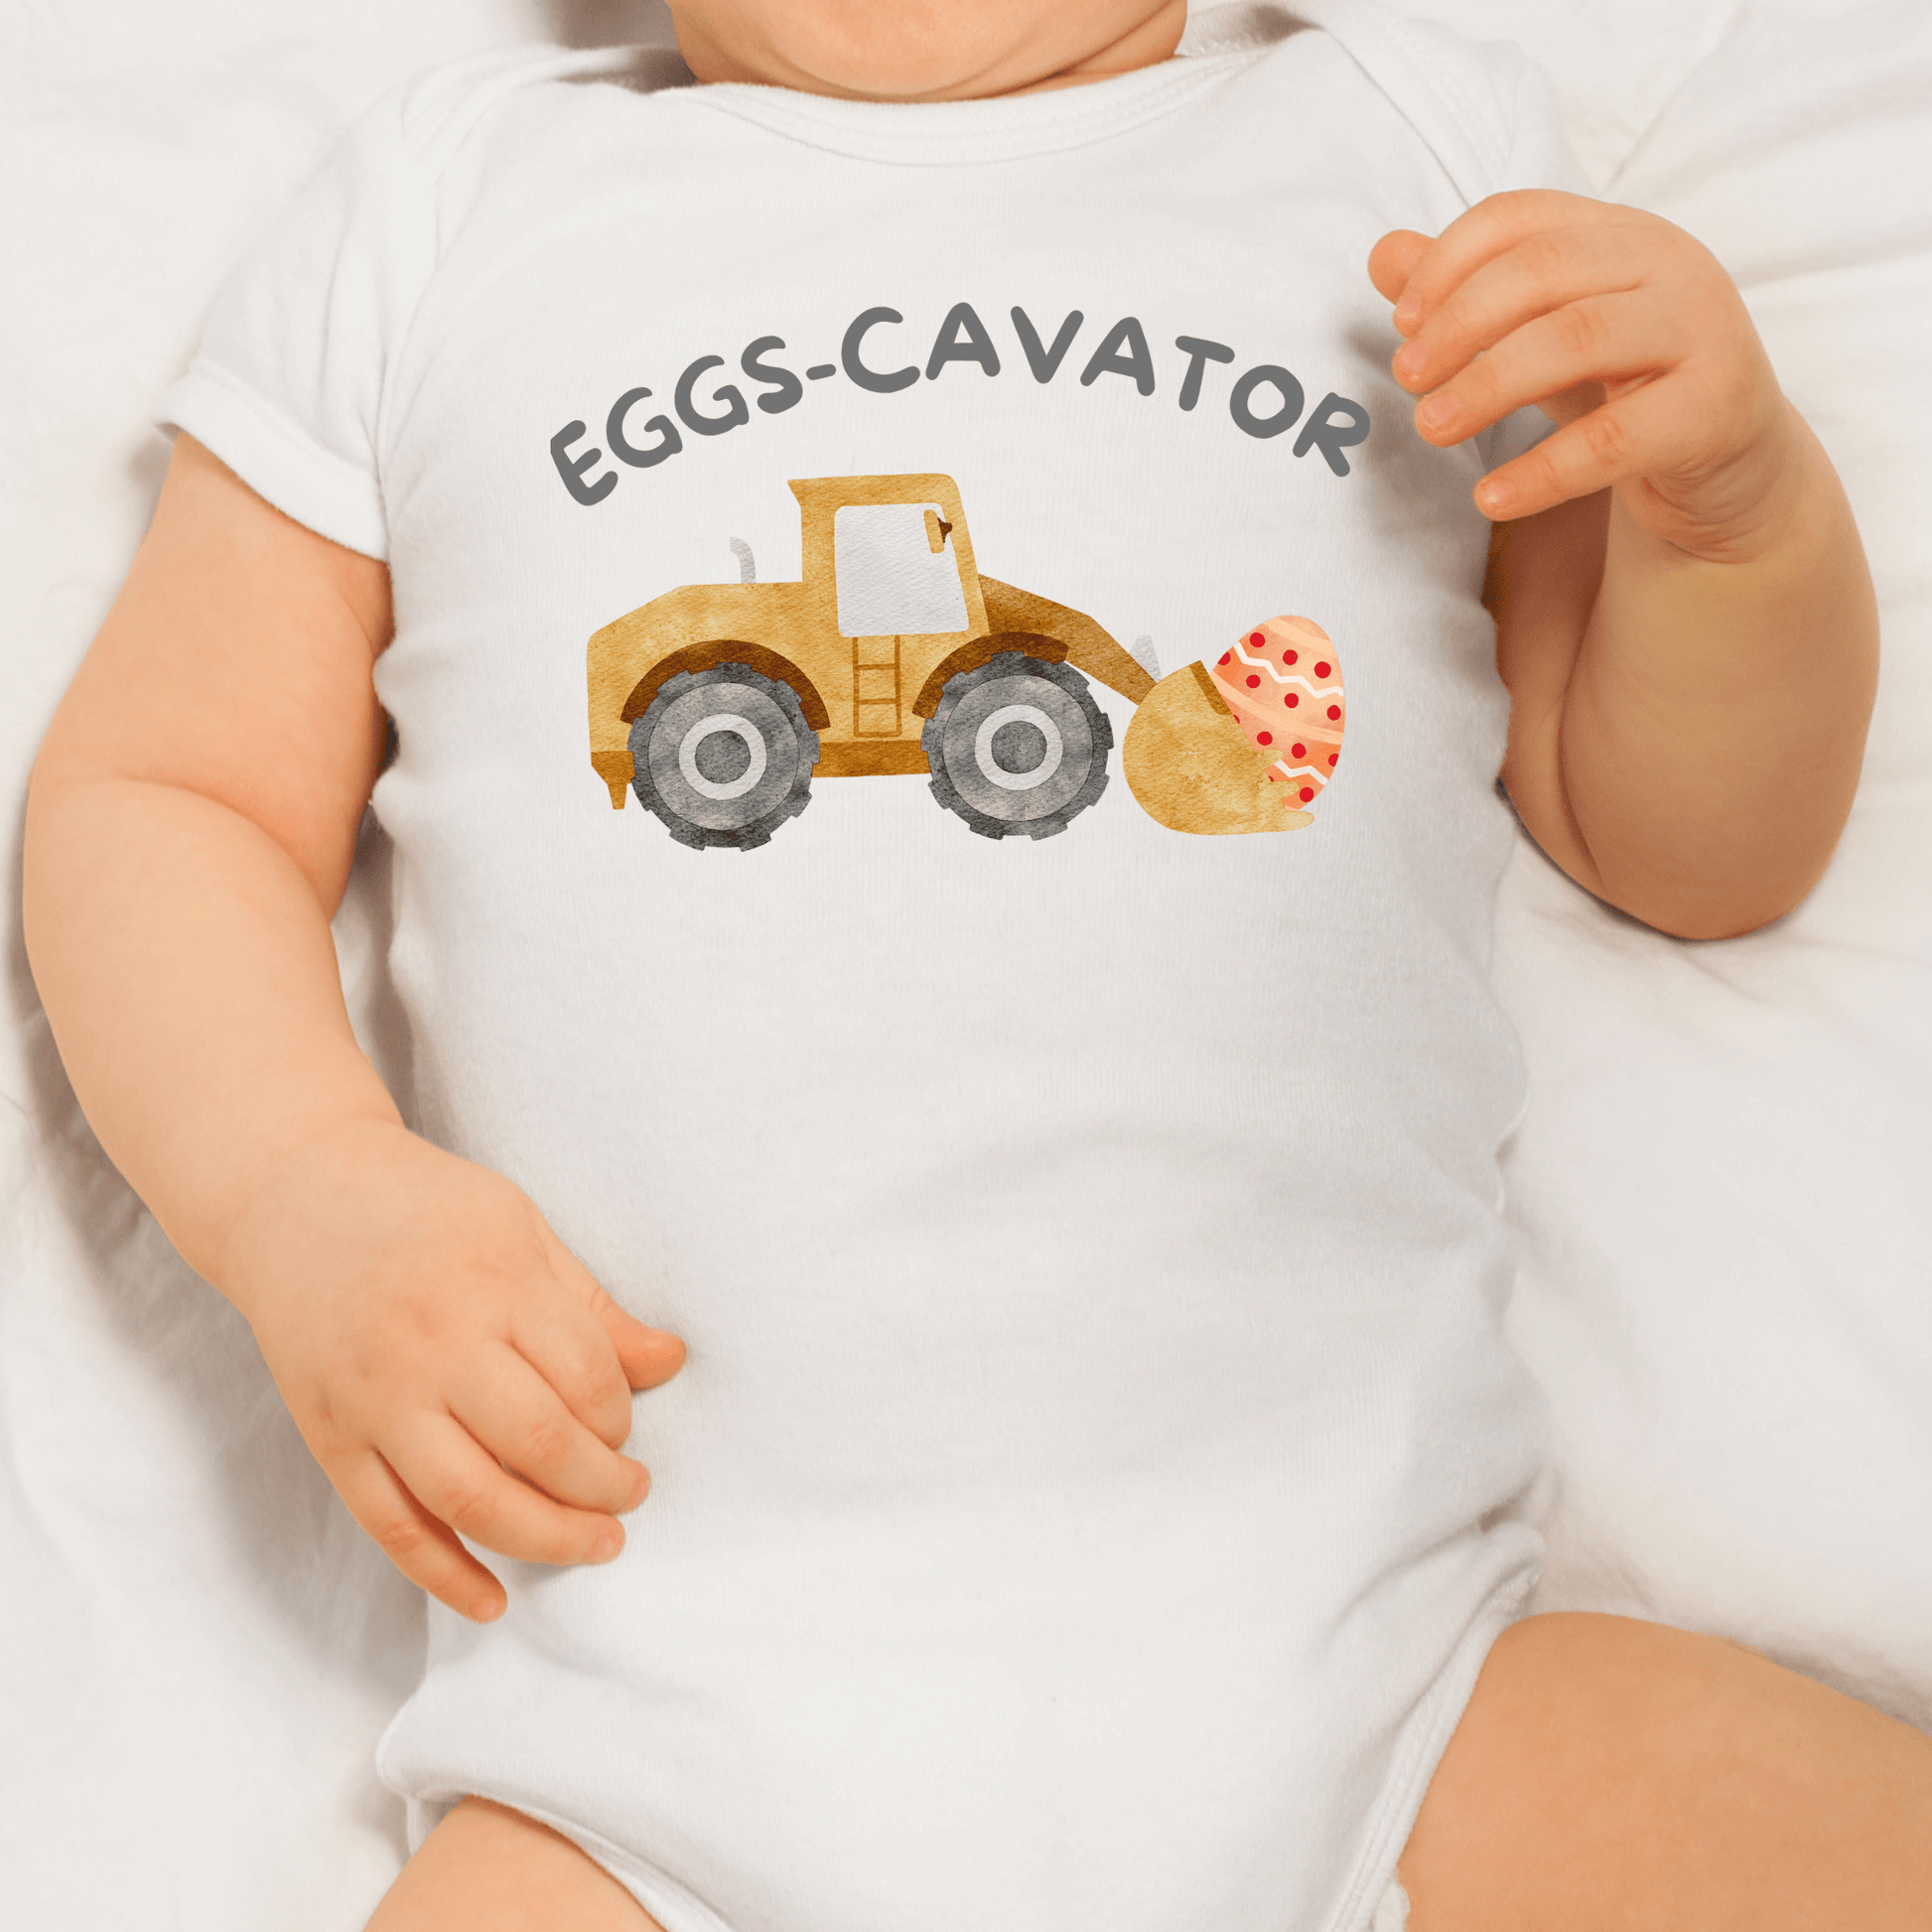 Easter baby outfit, baby toddler clothes, easter Sunday clothing, funny easter outfit, hipster baby easter clothes, spring outfit white kid baby clothing gift easter idea